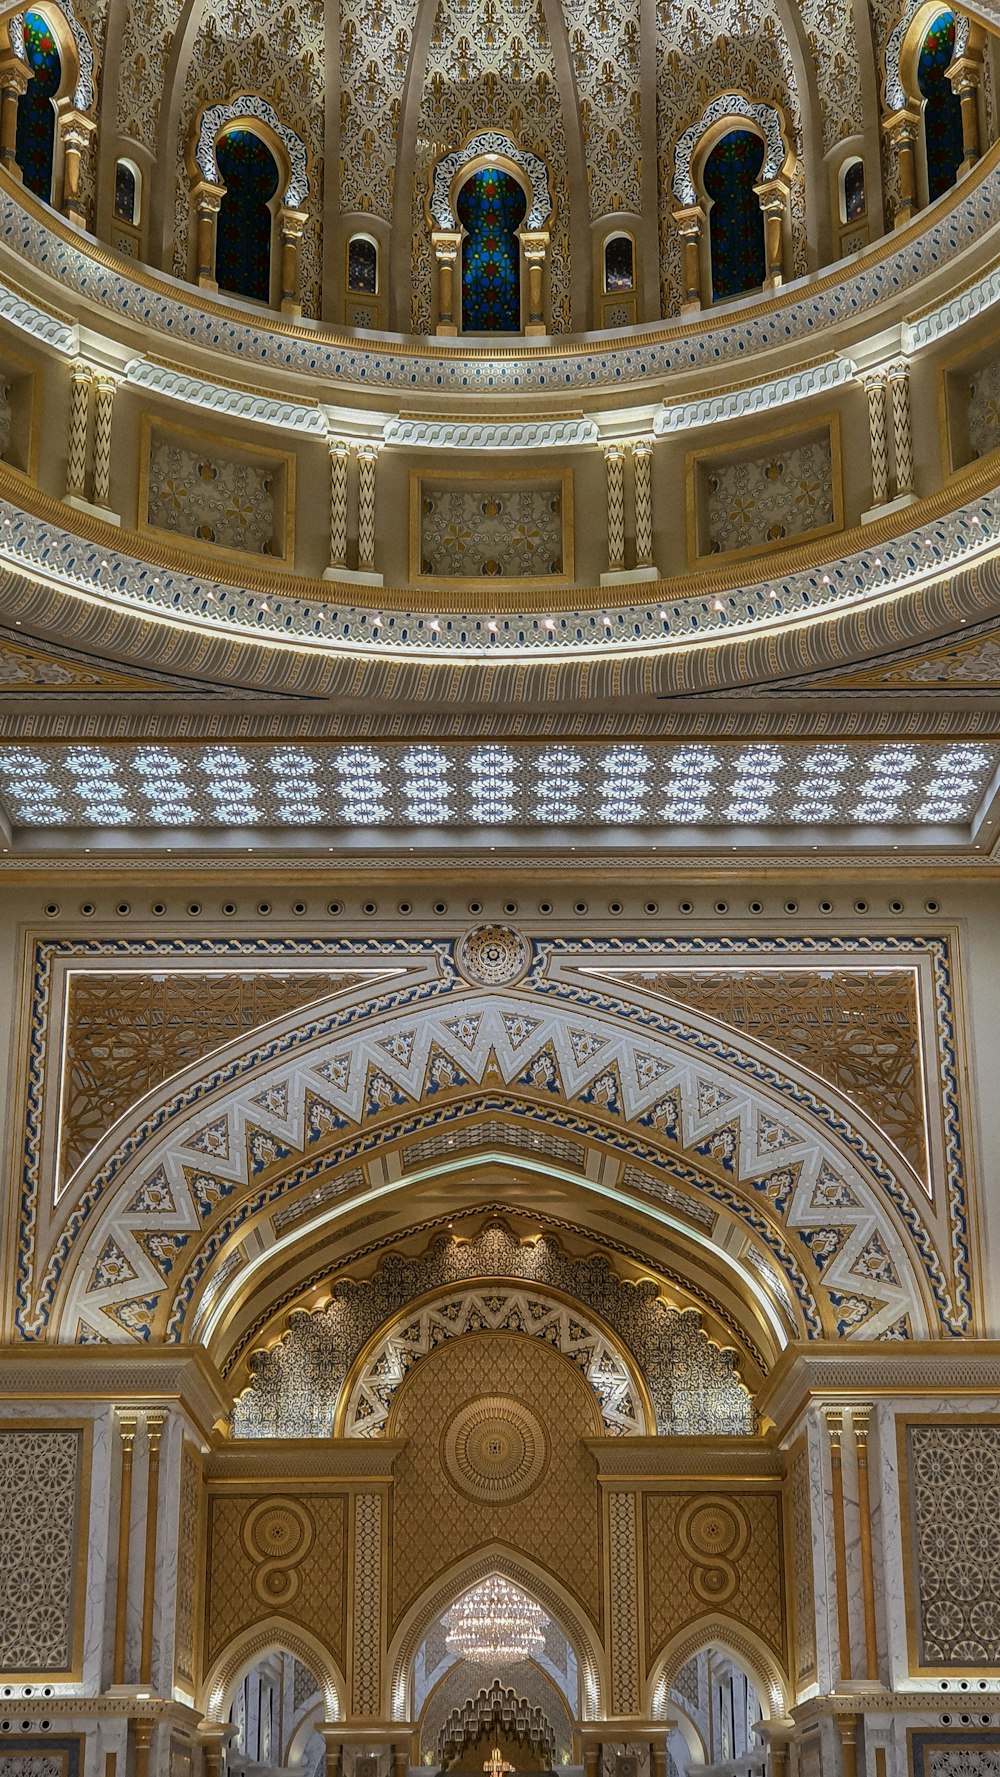 a large ornate ceiling with many arches